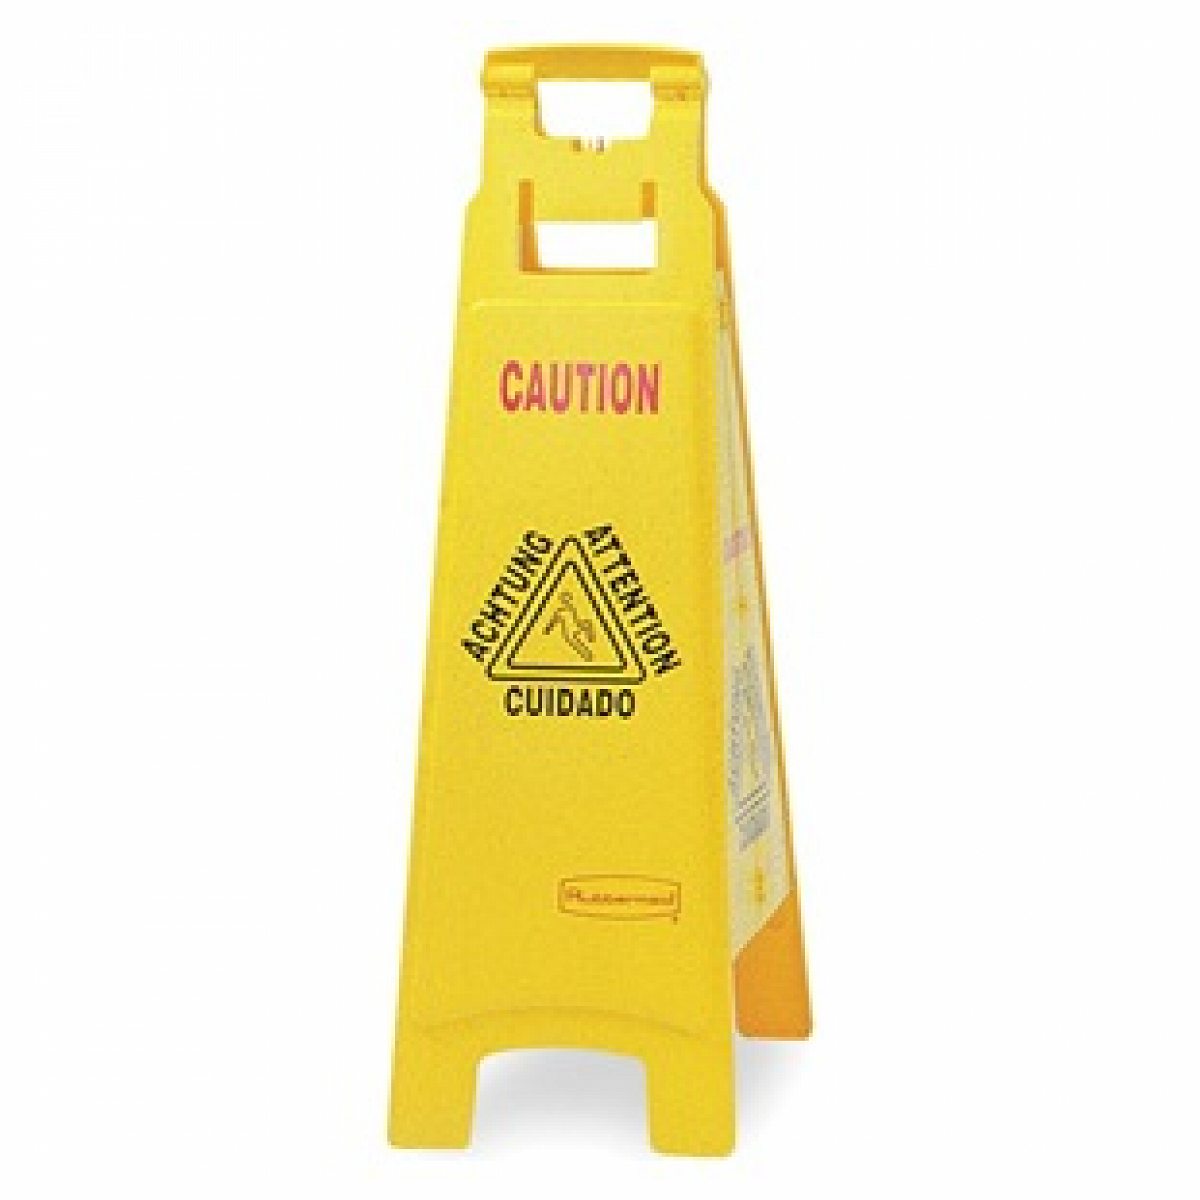 WET FLOOR SIGN 4 SIDED
CAUTION WITH MULTI-LINGUAL
6/CS 